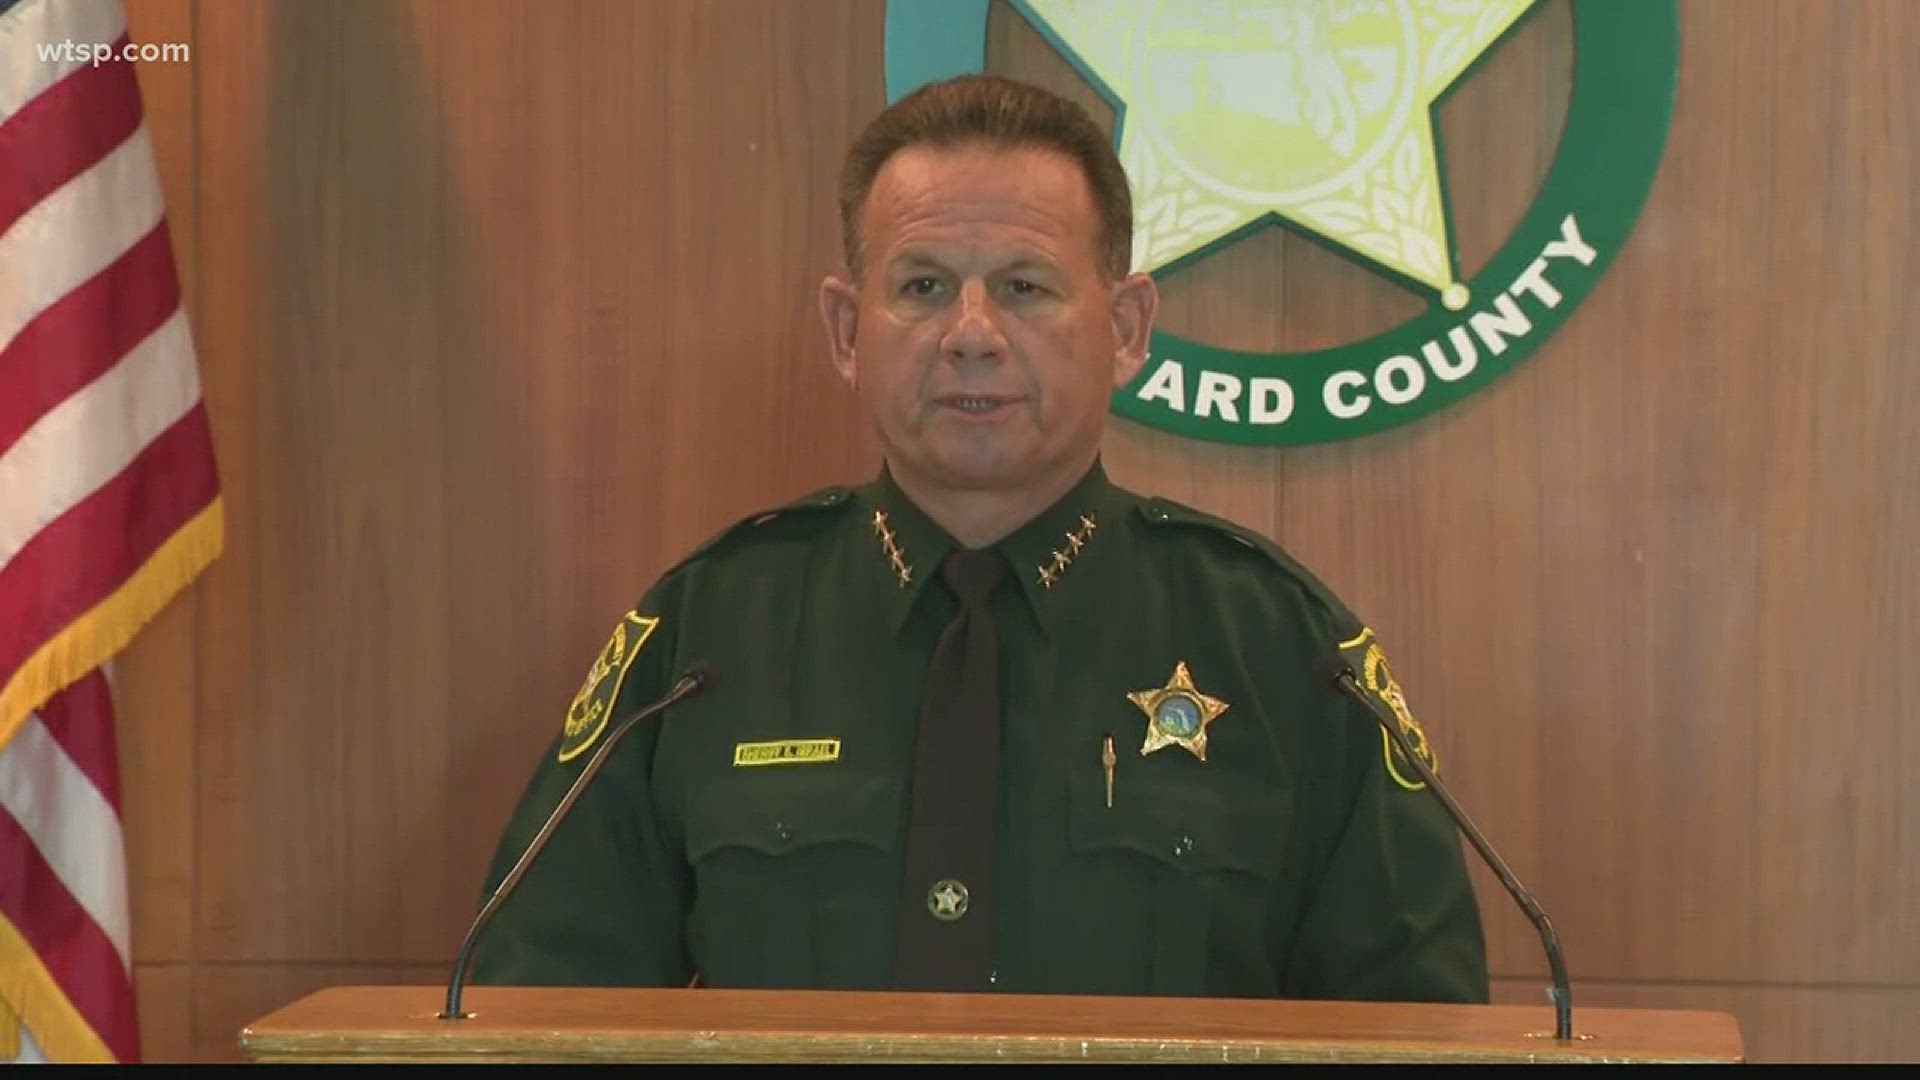 Broward Sheriff's Office has opened an investigation against resource officer on campus during Parkland school shooting